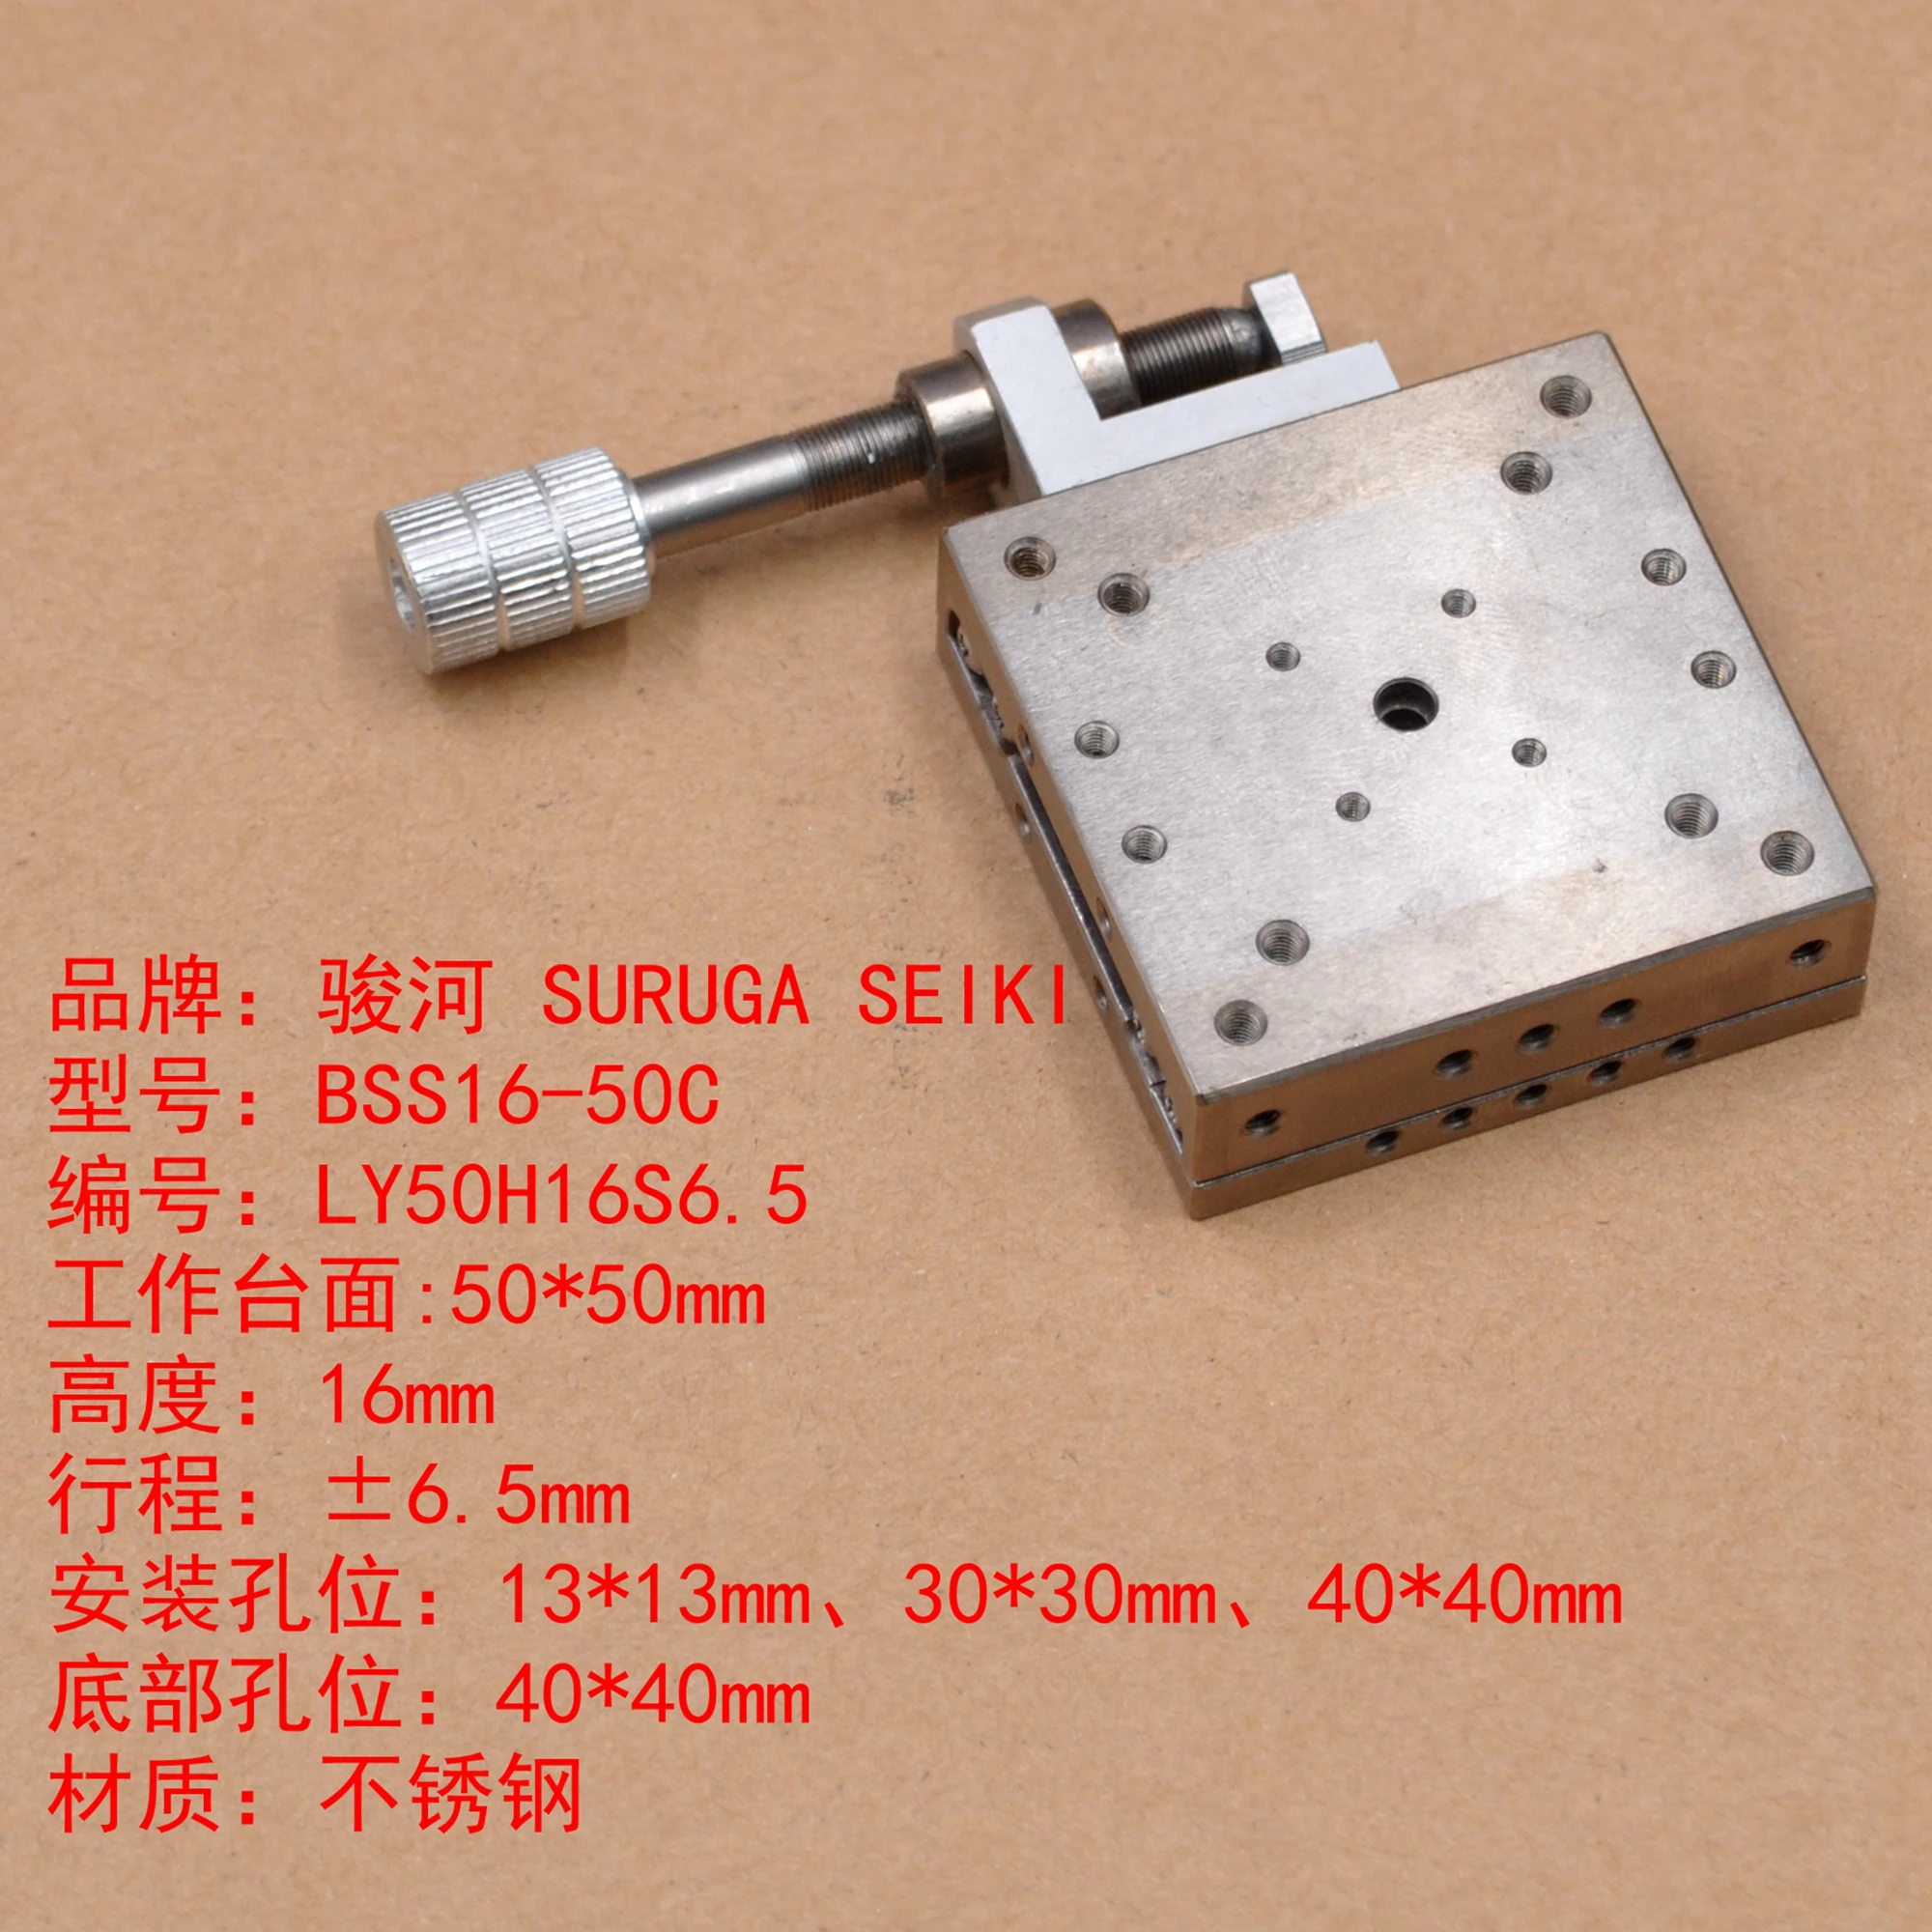 SURUGA BSS16-50C X-axis 50 * 50mm Table Optical Guide Type Worktable Precision Displacement Fine-tuning Sliding Table Steel enlarge